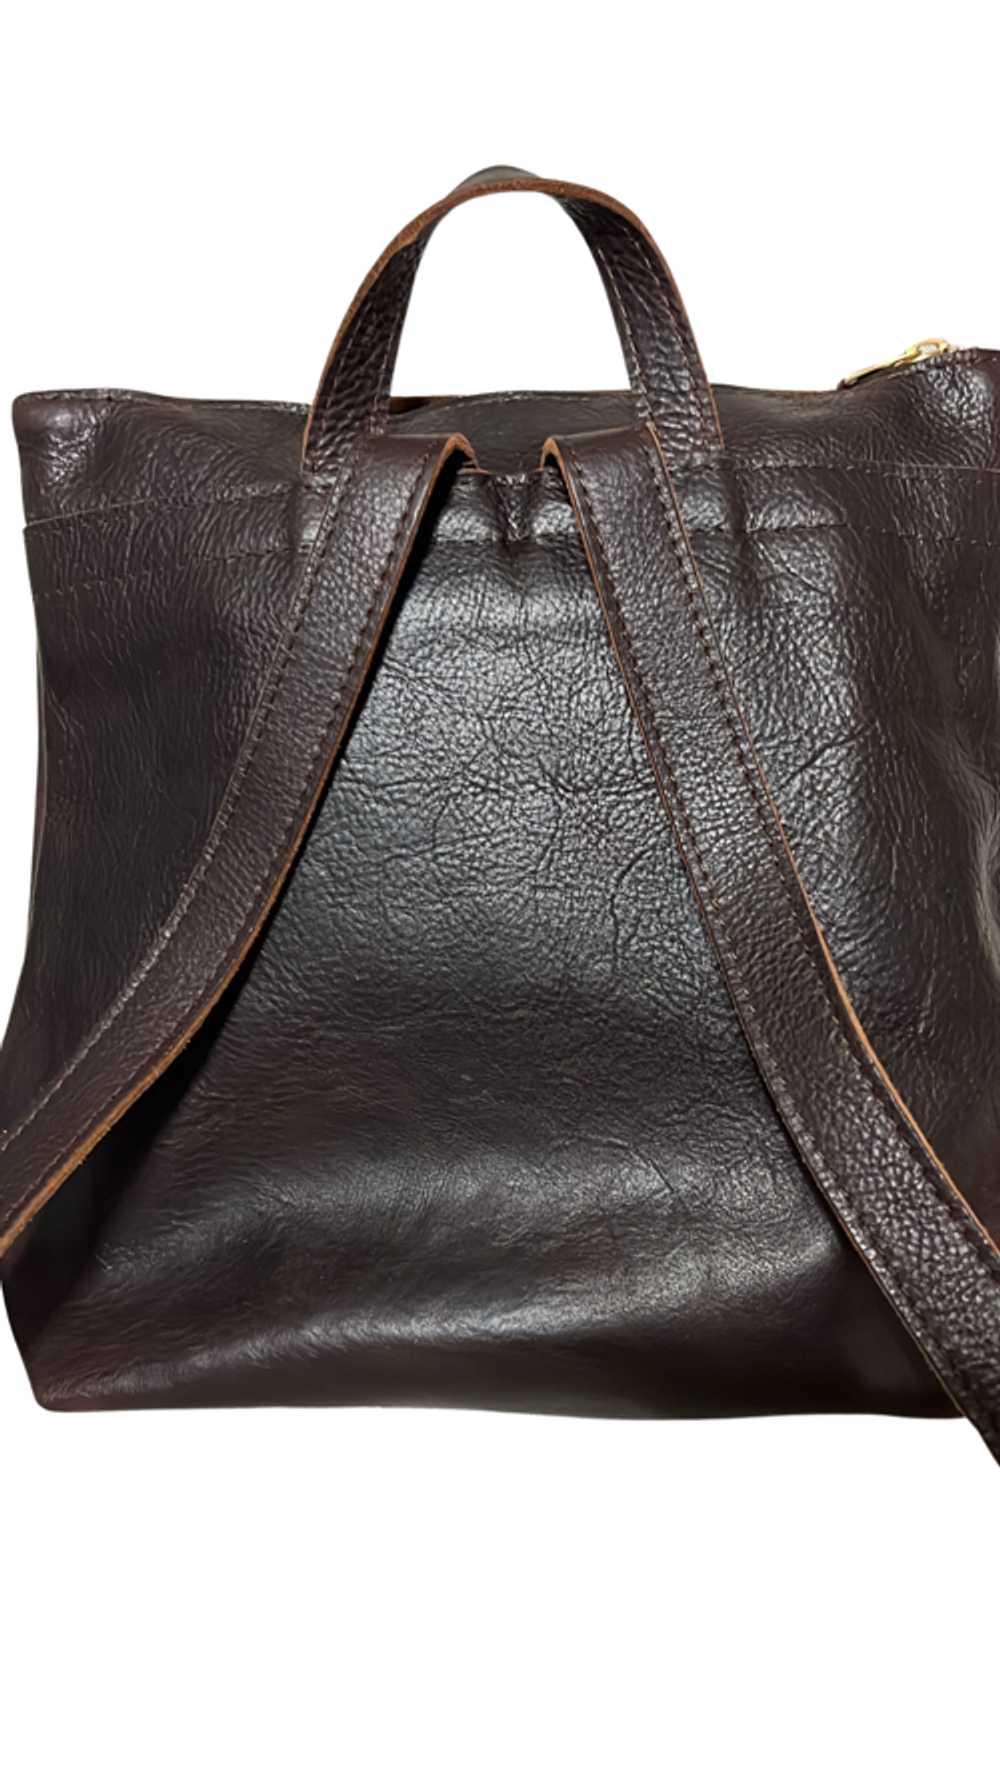 Portland Leather Tote Backpack - image 4